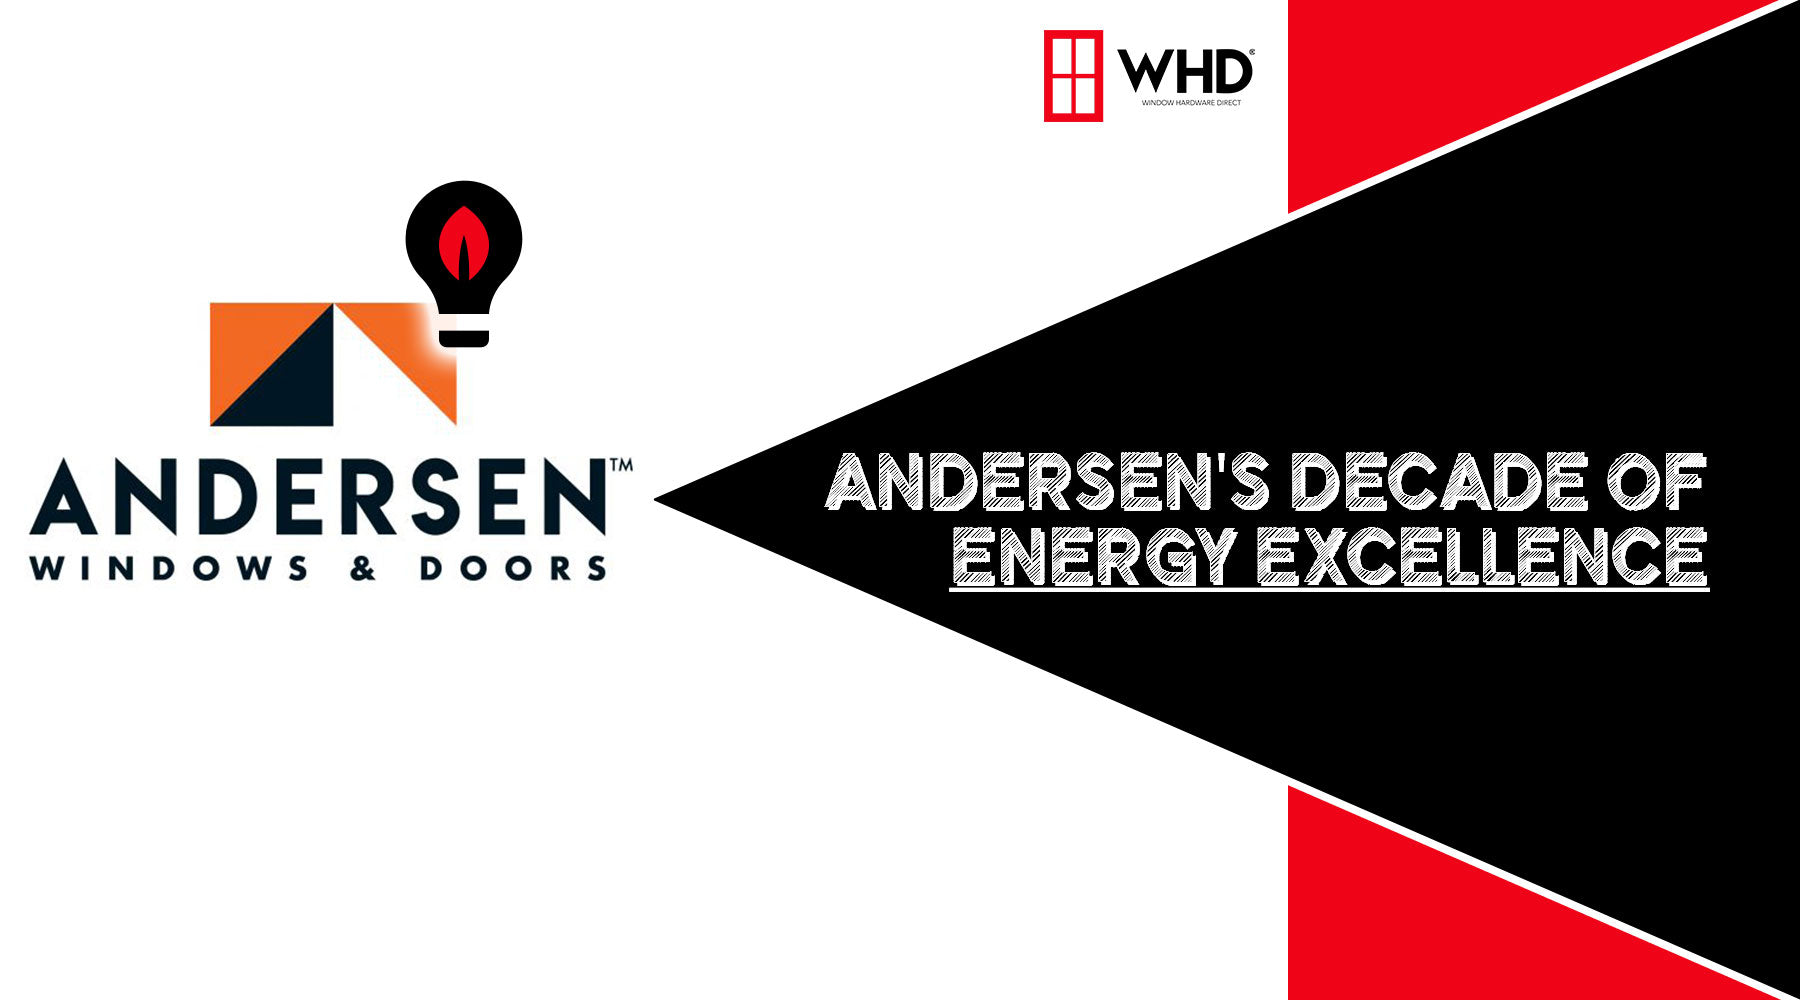 Andersen's Decade of Energy Excellence: Sustainable Innovation